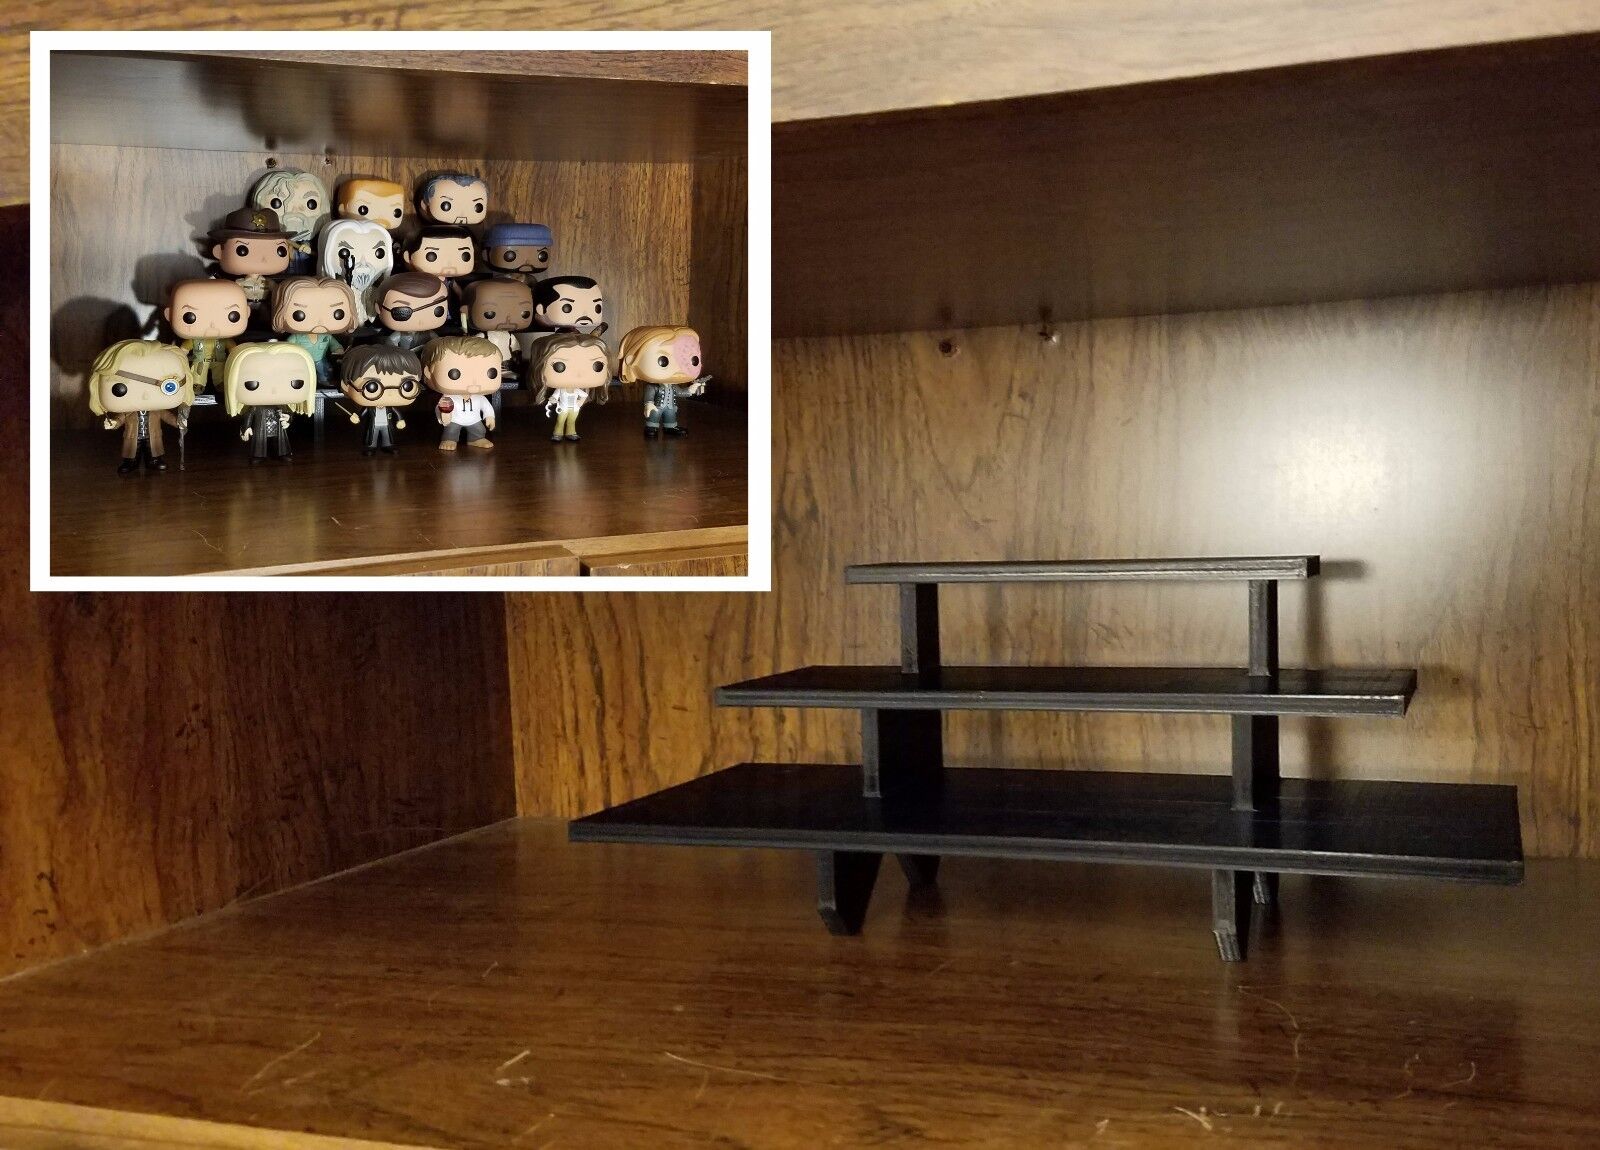 14 inch - Black Funko Pop Display Shelf - Holds Up to 14 Pops On 3 Levels